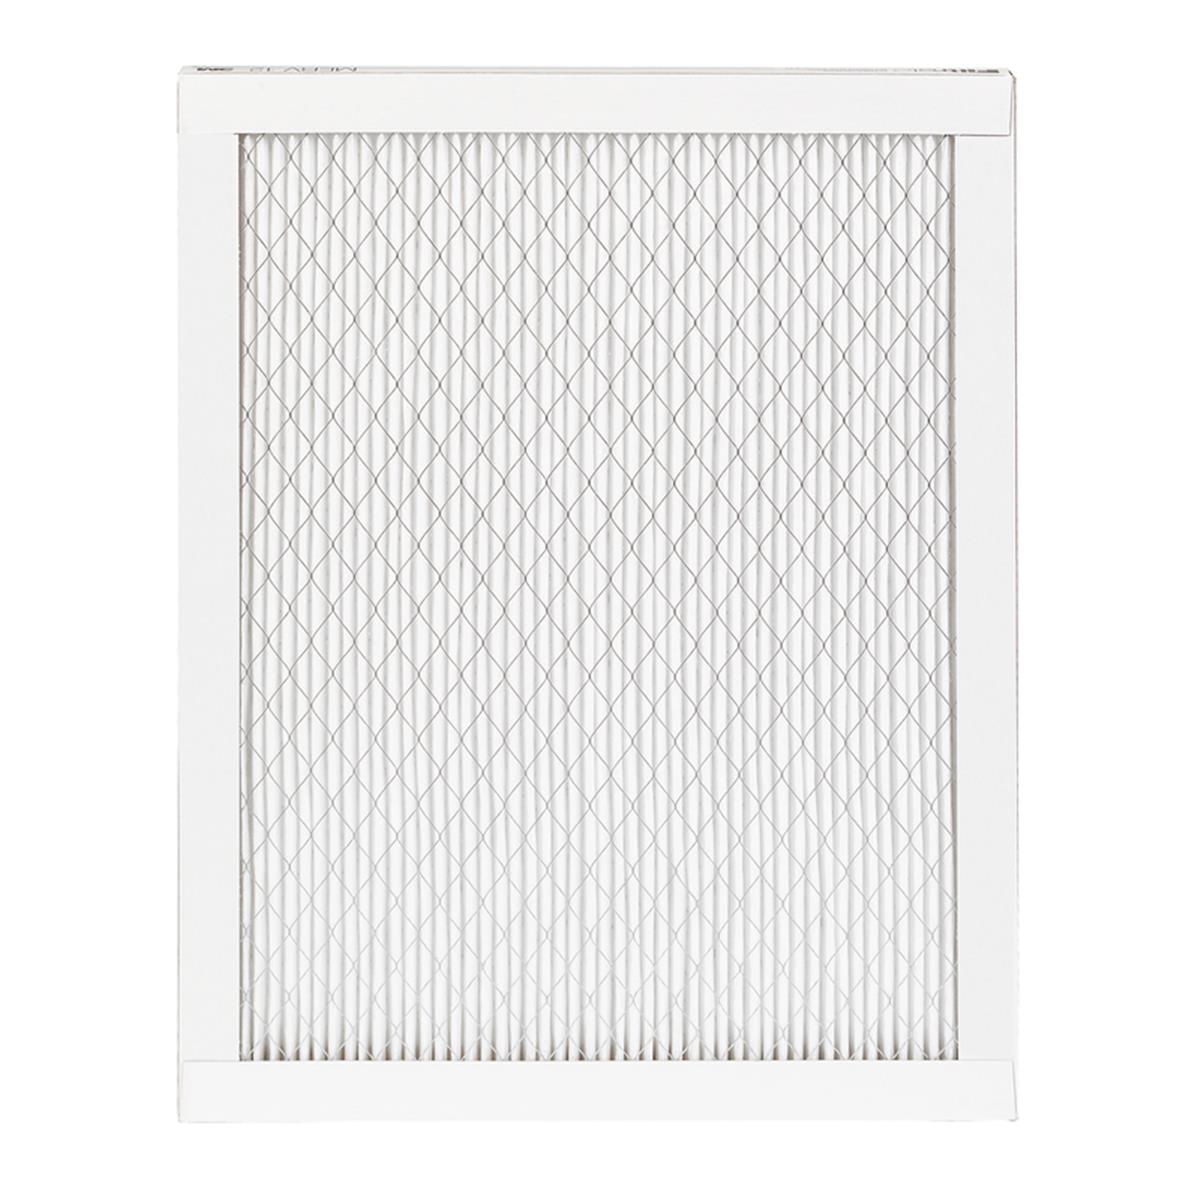 Picture of 3M 4269551 16 x 16 x 1 in. 1500 MPR Air Filter - pack of 4